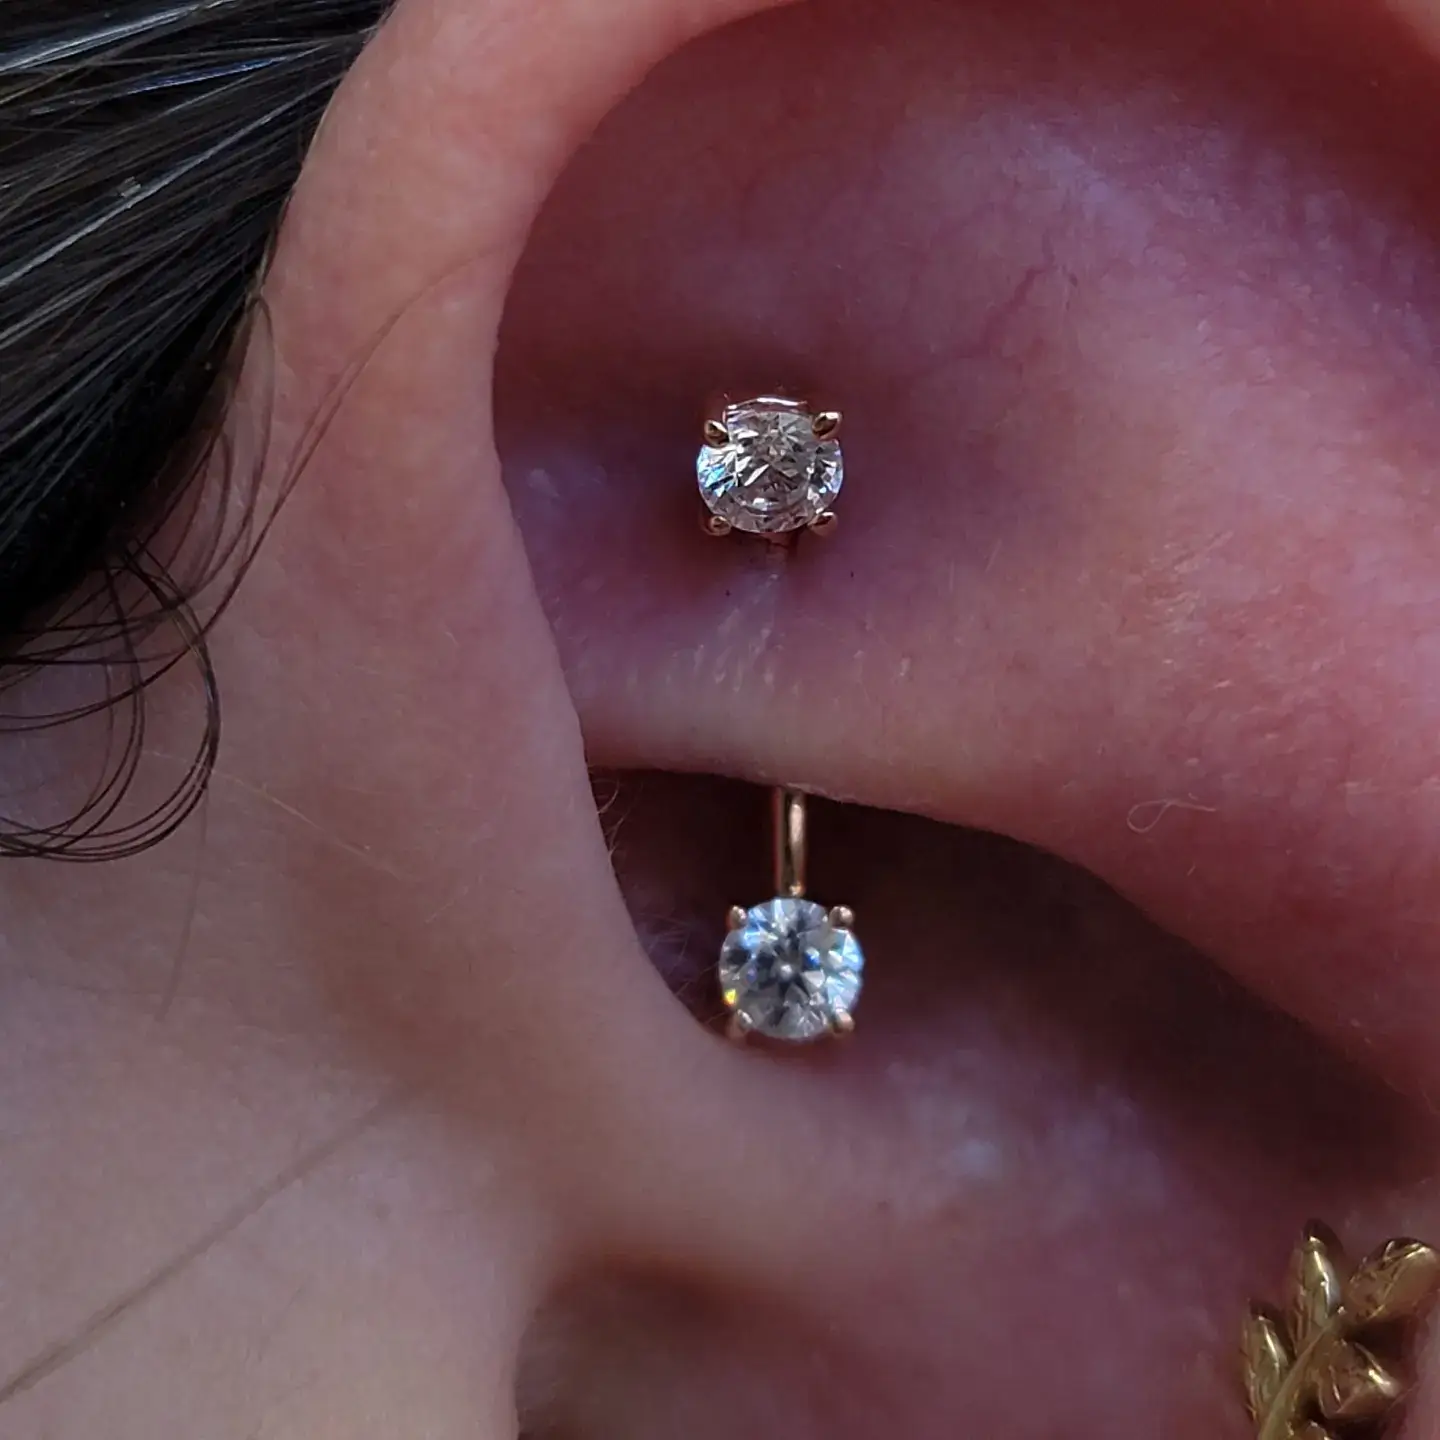 Rook piercing done with solid gold
						